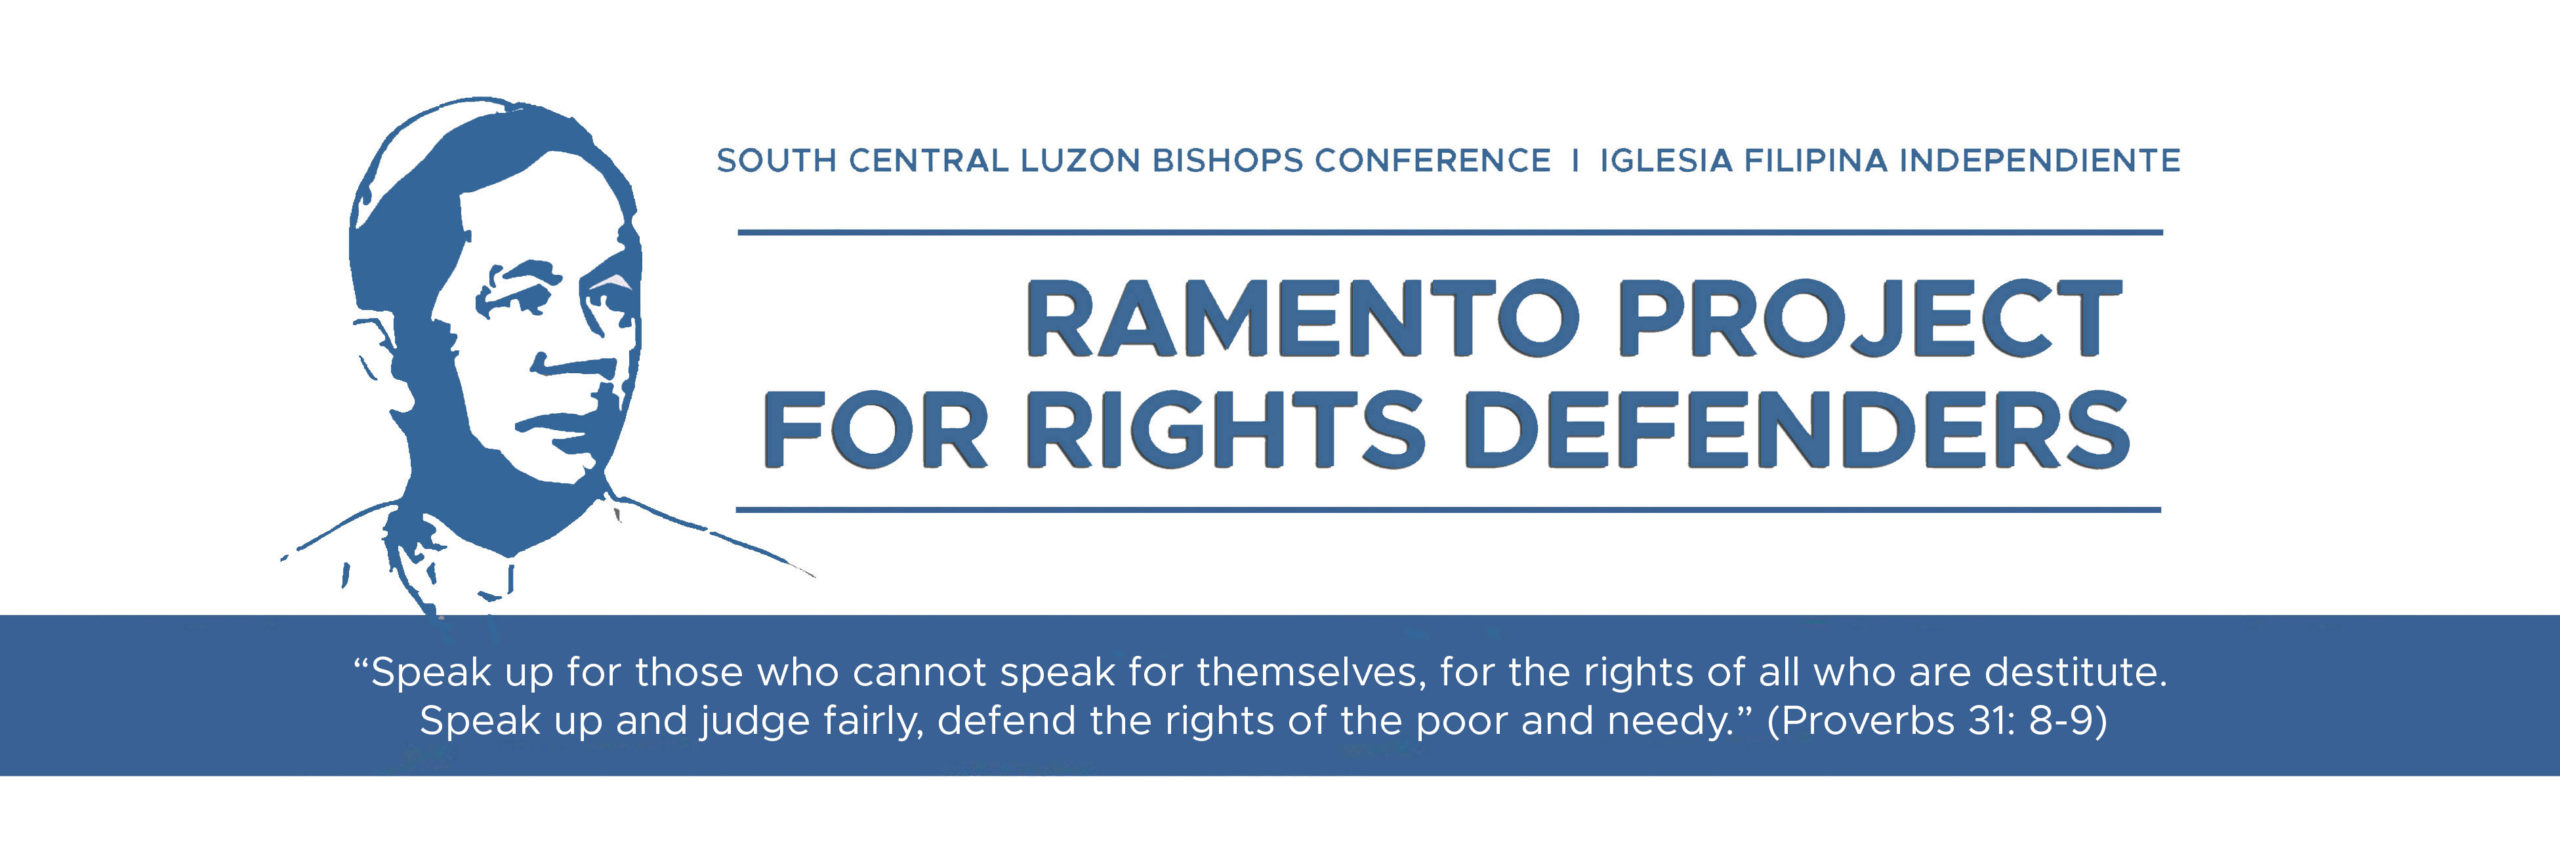 Ramento Project for Rights Defenders